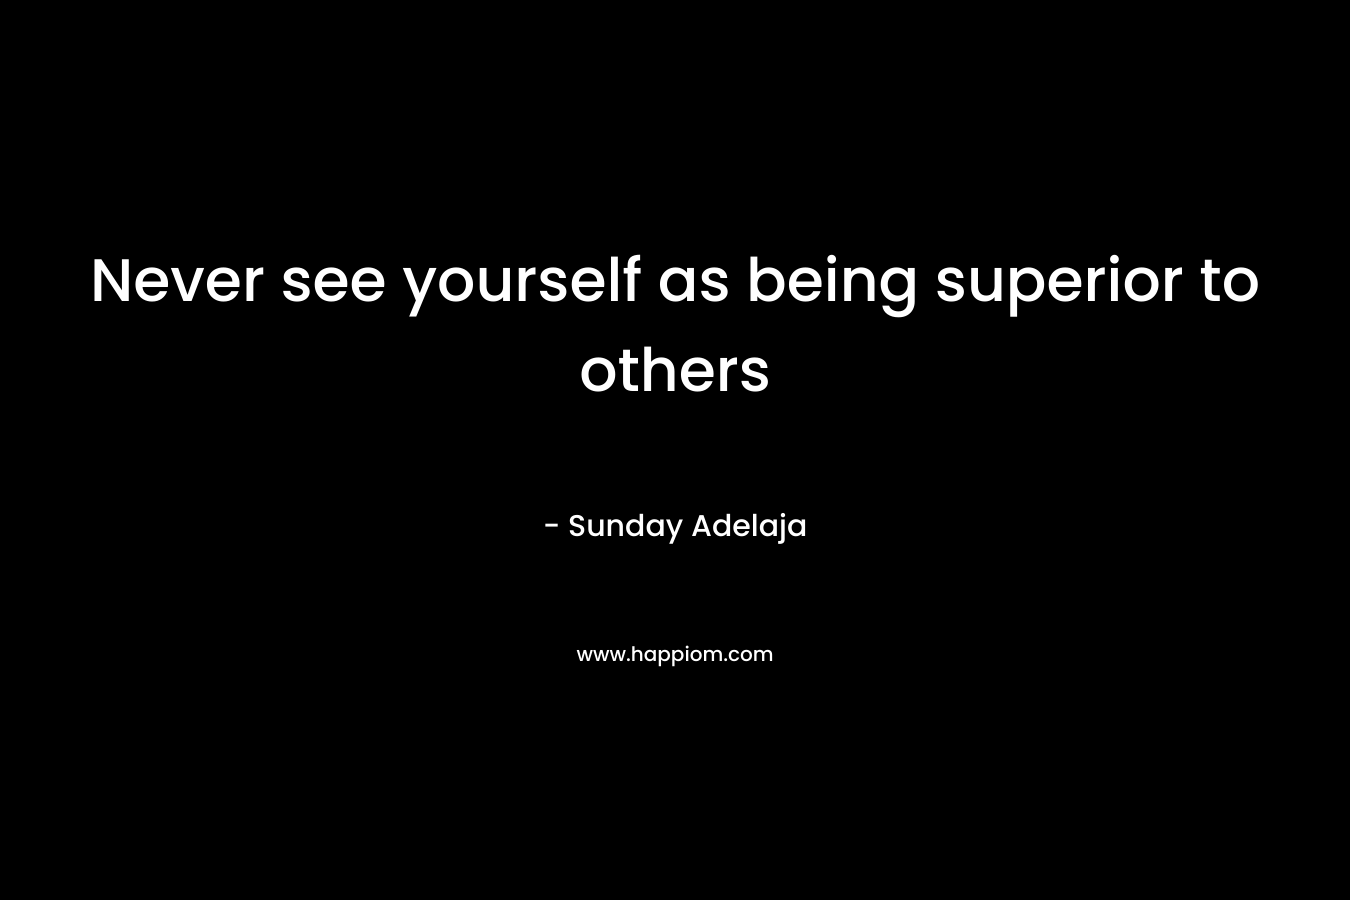 Never see yourself as being superior to others